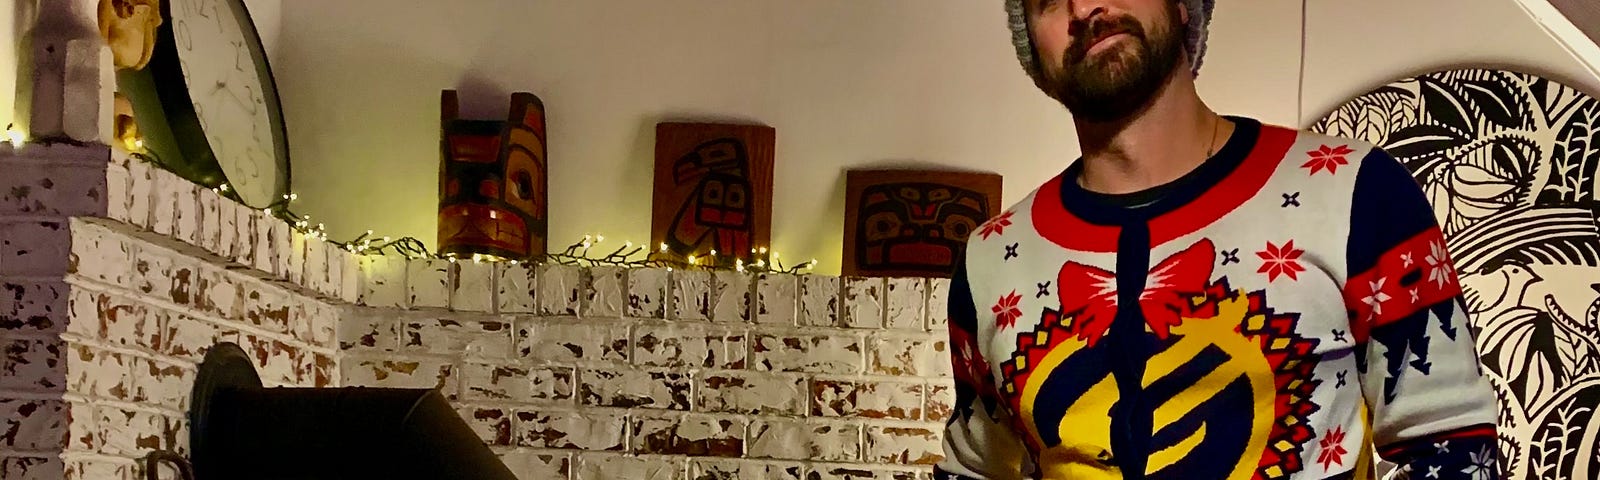 A man stands before a hearth with a wood stove and a brick wall behind him. He is wearing a tuque and an ugly Christmas sweater. He has a beard.